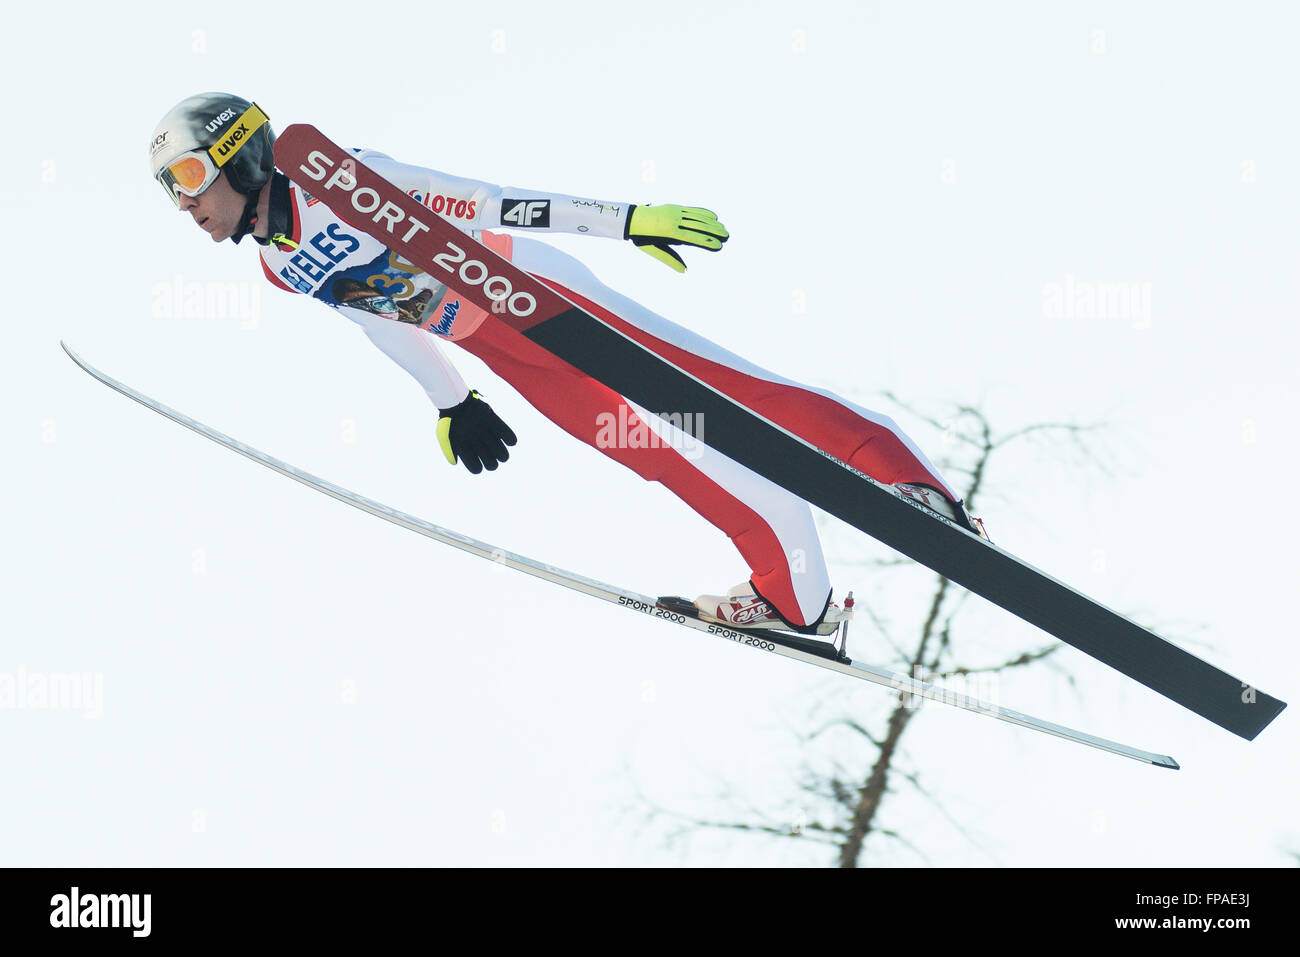 Planica, Slovenia. 18th Mar, 2016. Stefan Hula of Poland competes during Planica FIS Ski Jumping World Cup finals on the March 18, 2016 in Planica, Slovenia. © Rok Rakun/Pacific Press/Alamy Live News Stock Photo